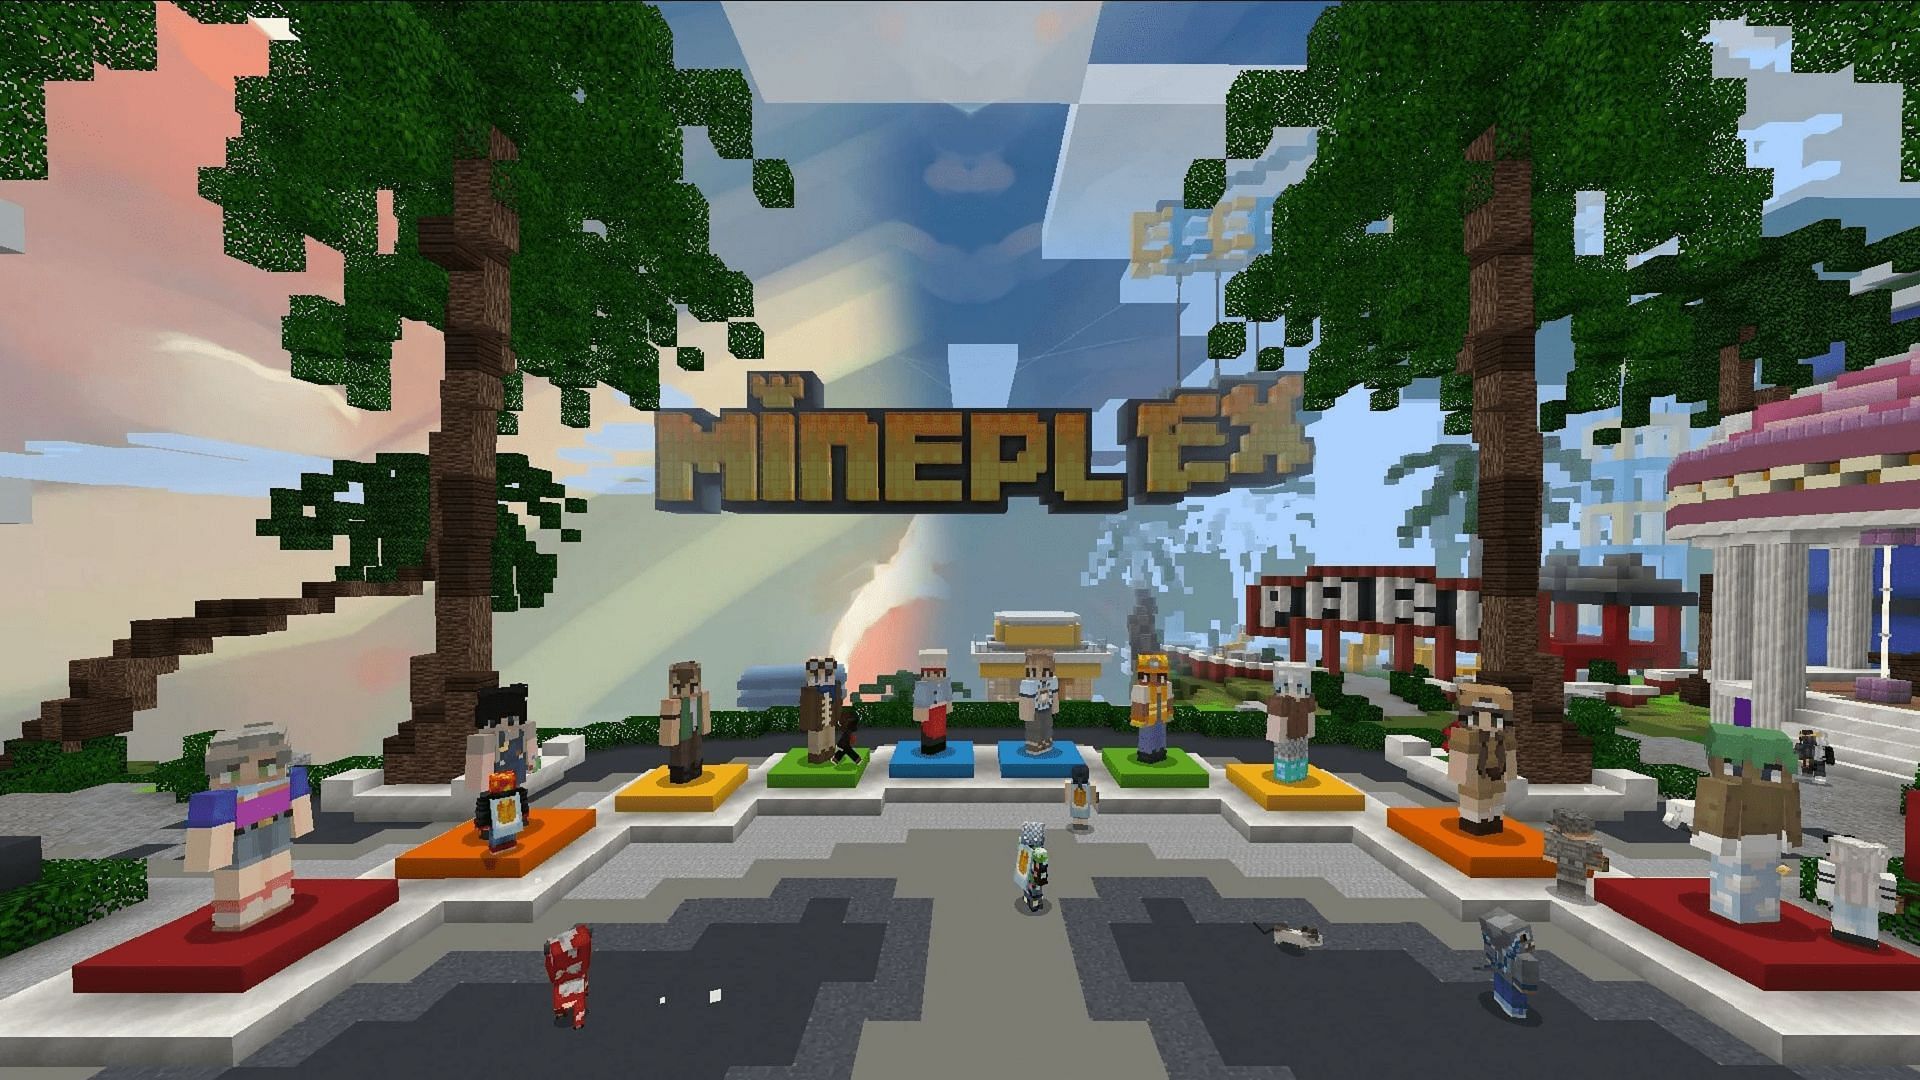 Mineplex has its own variant of Bedwars that Minecraft players may want to try (Image via Mineplex)